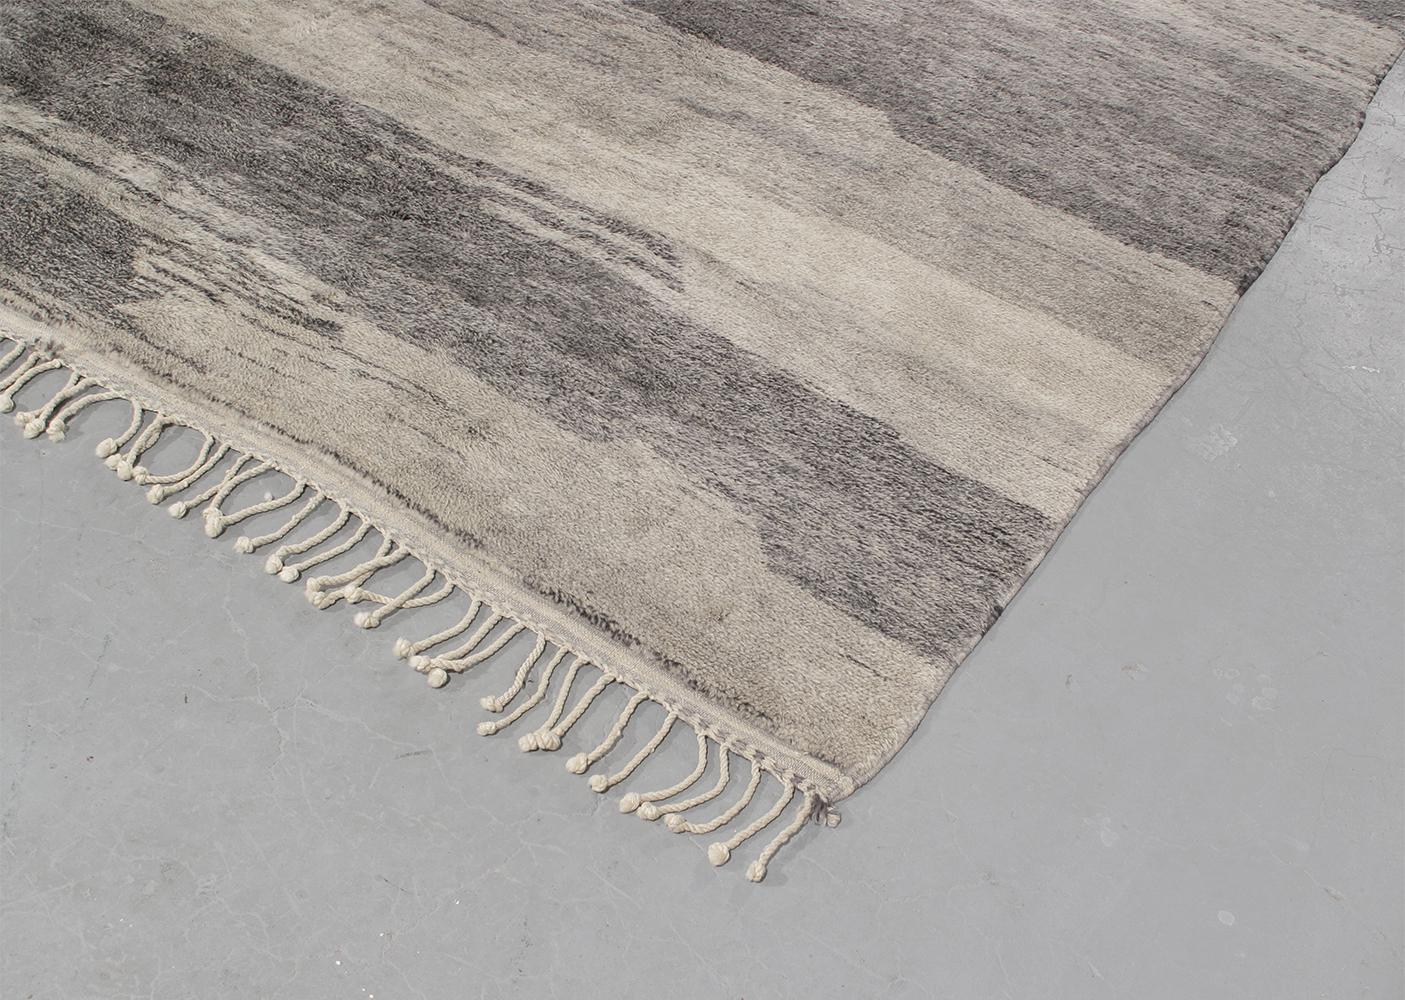 This original Moroccan rug is styled after the Beni Ourain rugs that were produced by the nomadic Berber tribes in North Africa for centuries. Beni Ourain rugs are identified by their geometric lines that form an overall asymmetrical pattern. NASIRI